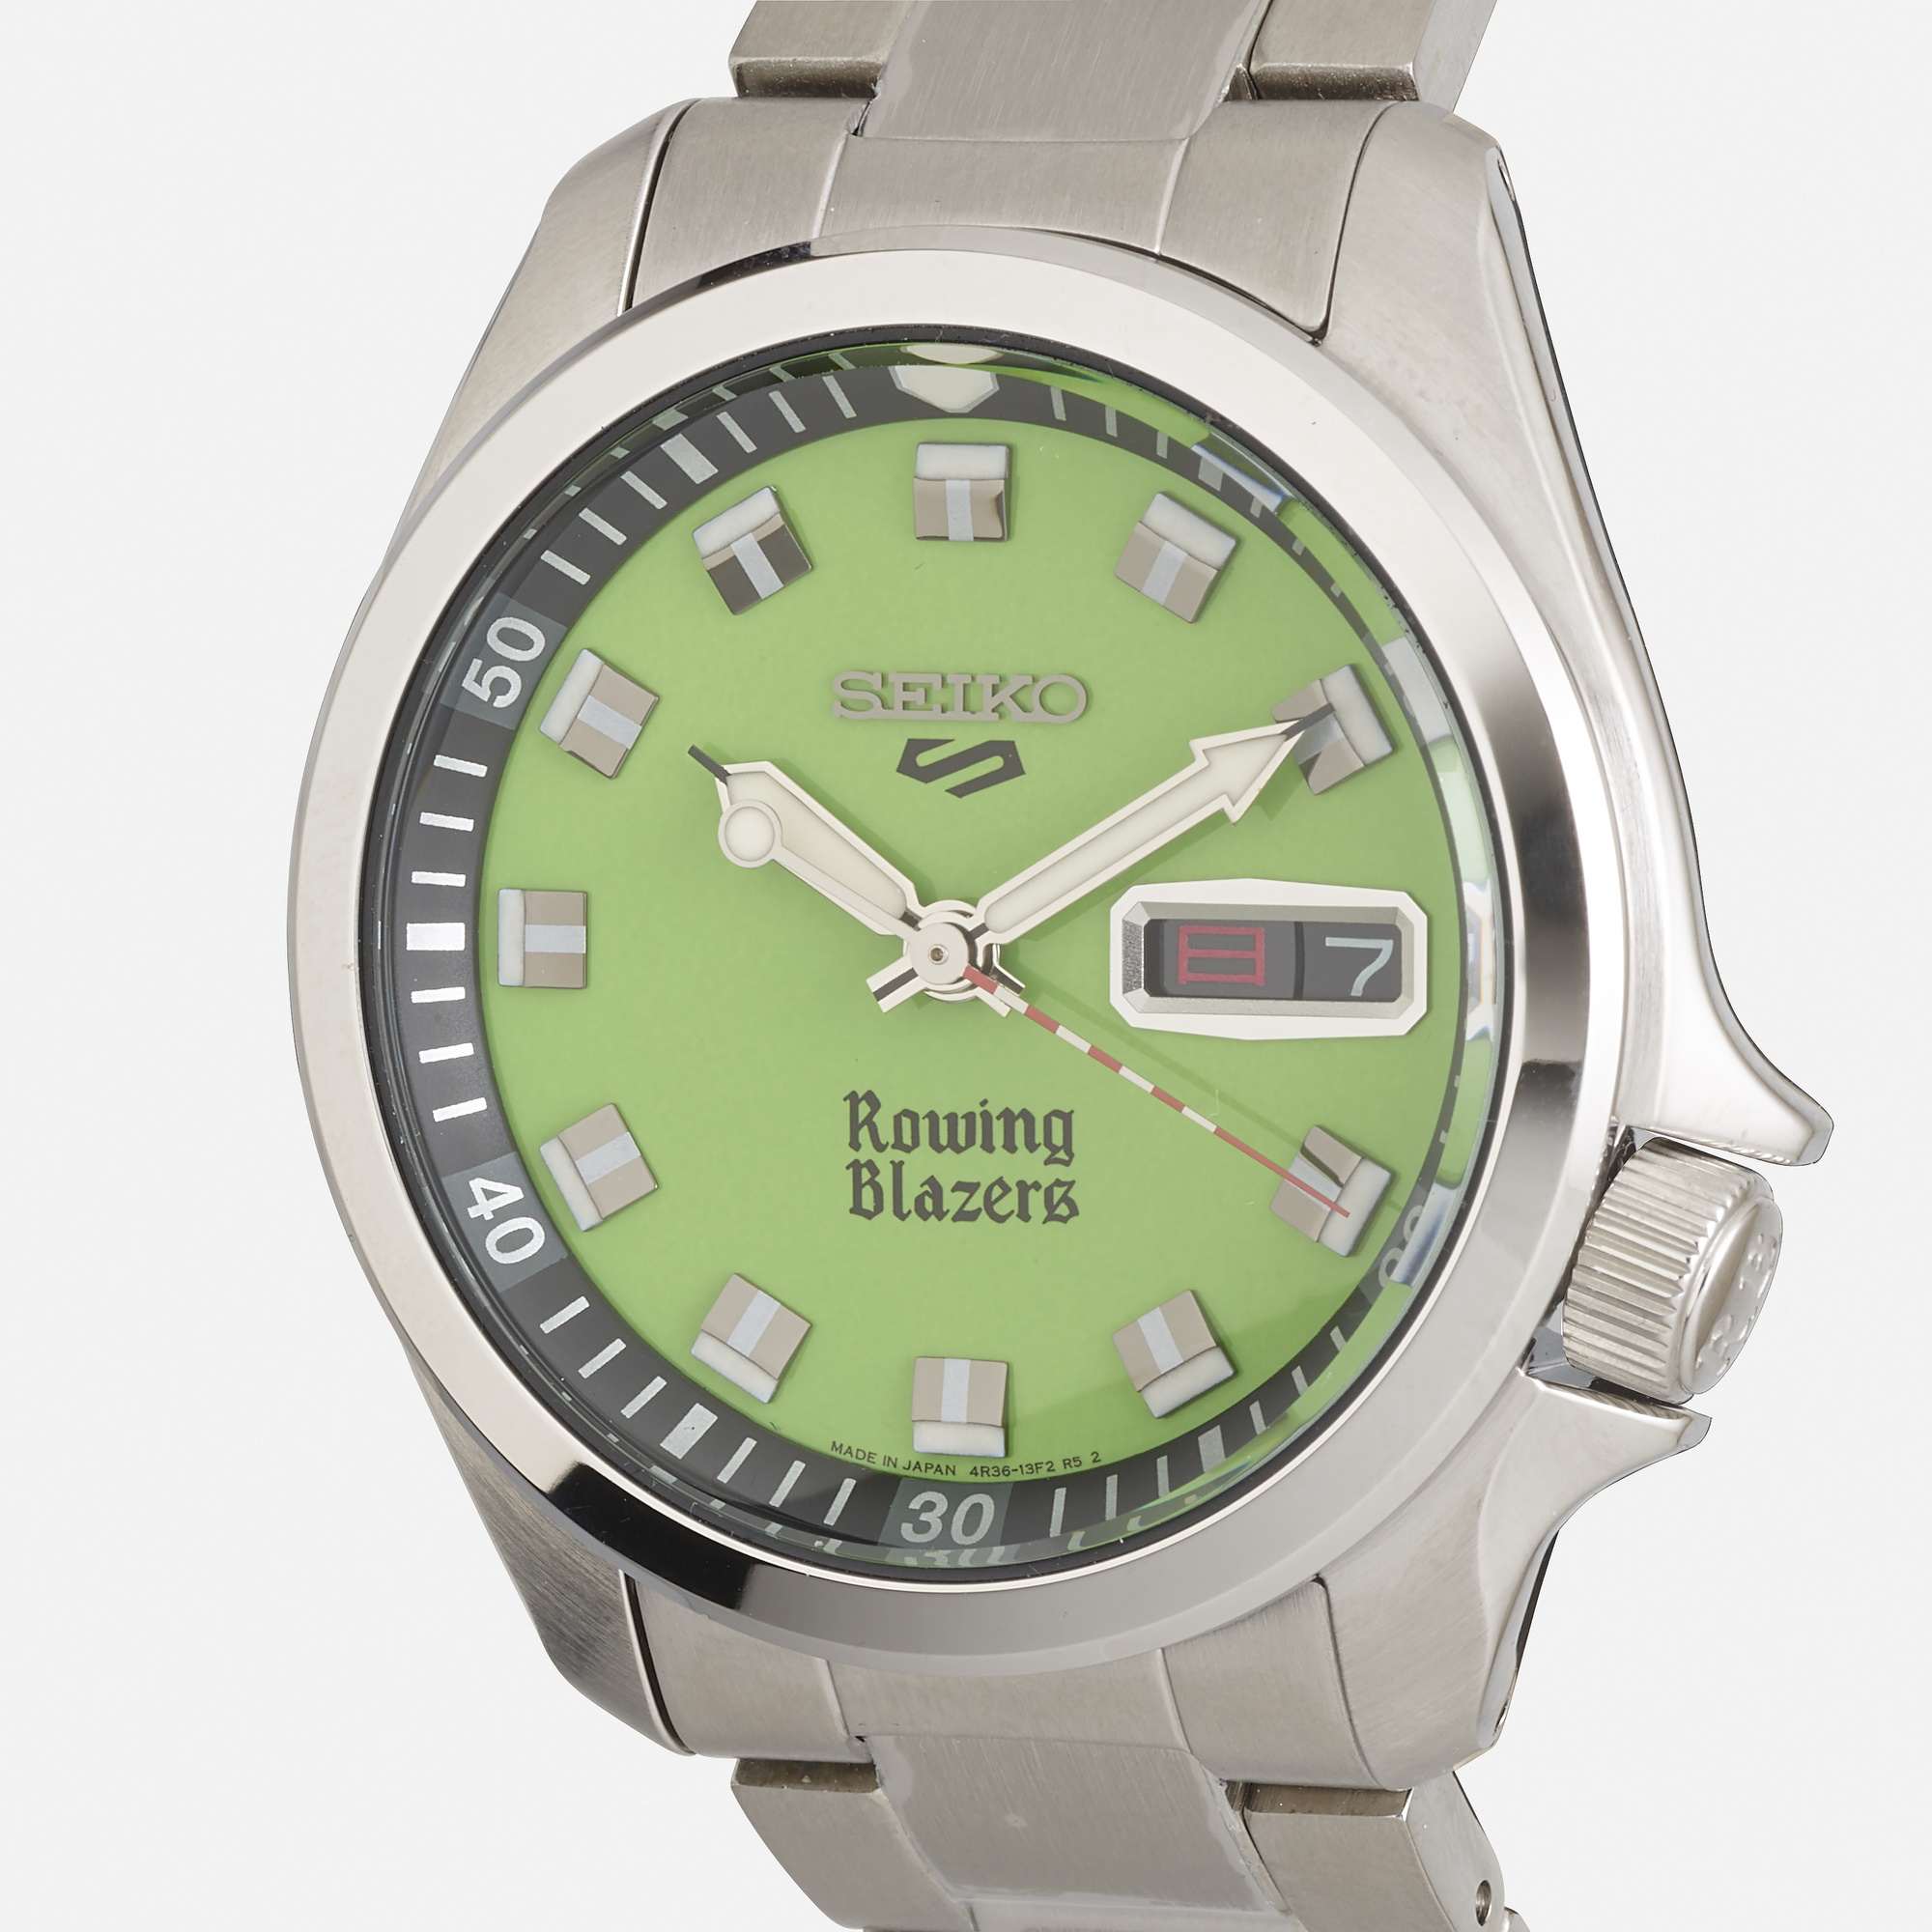 528: SEIKO, 'Rowing Blazers' limited edition stainless steel wristwatch,  Ref. SRPJ59 < Watches, 8 February 2023 < Auctions | Rago Auctions